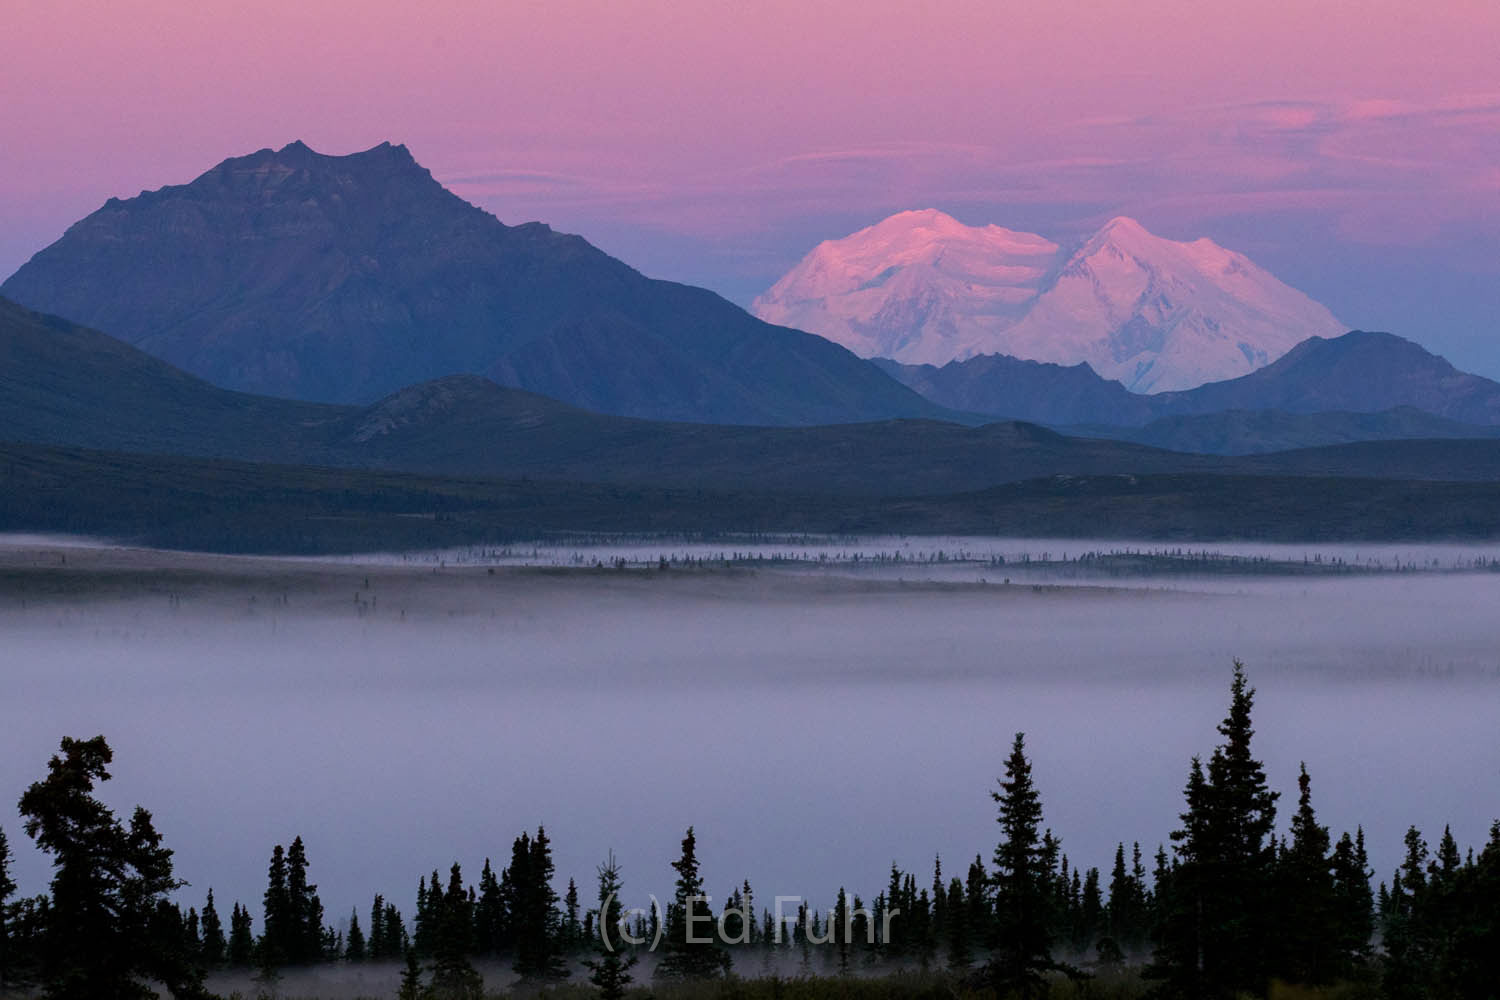 Mount Denali rises in the distance above the fog-filled valley.